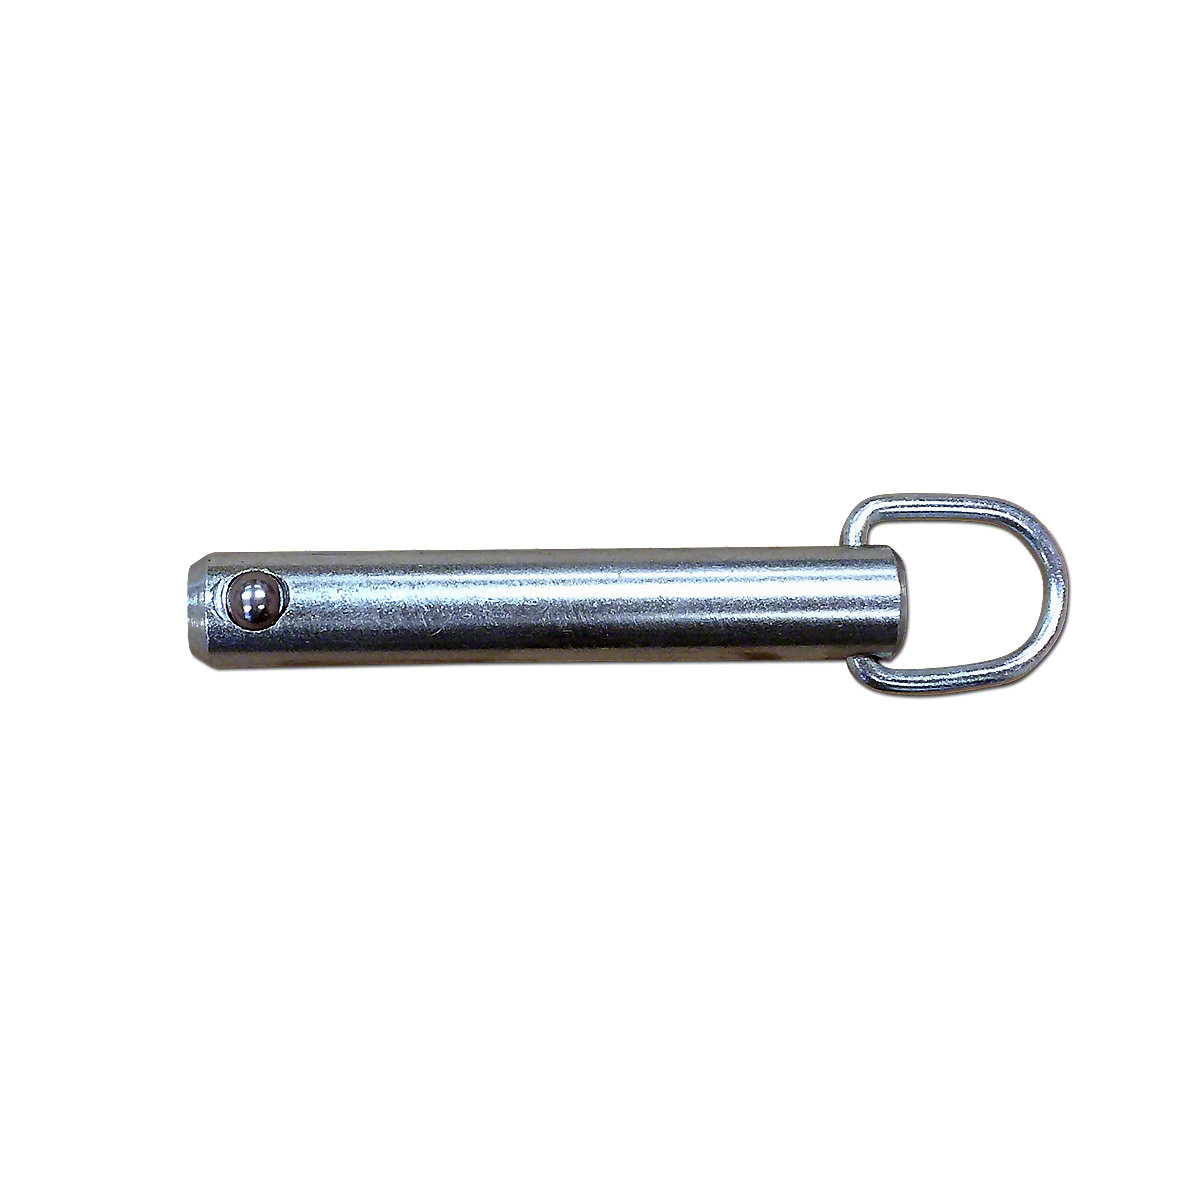 UT4385   Fast Hitch Pin with Ball and Handle---Replaces 517853R21